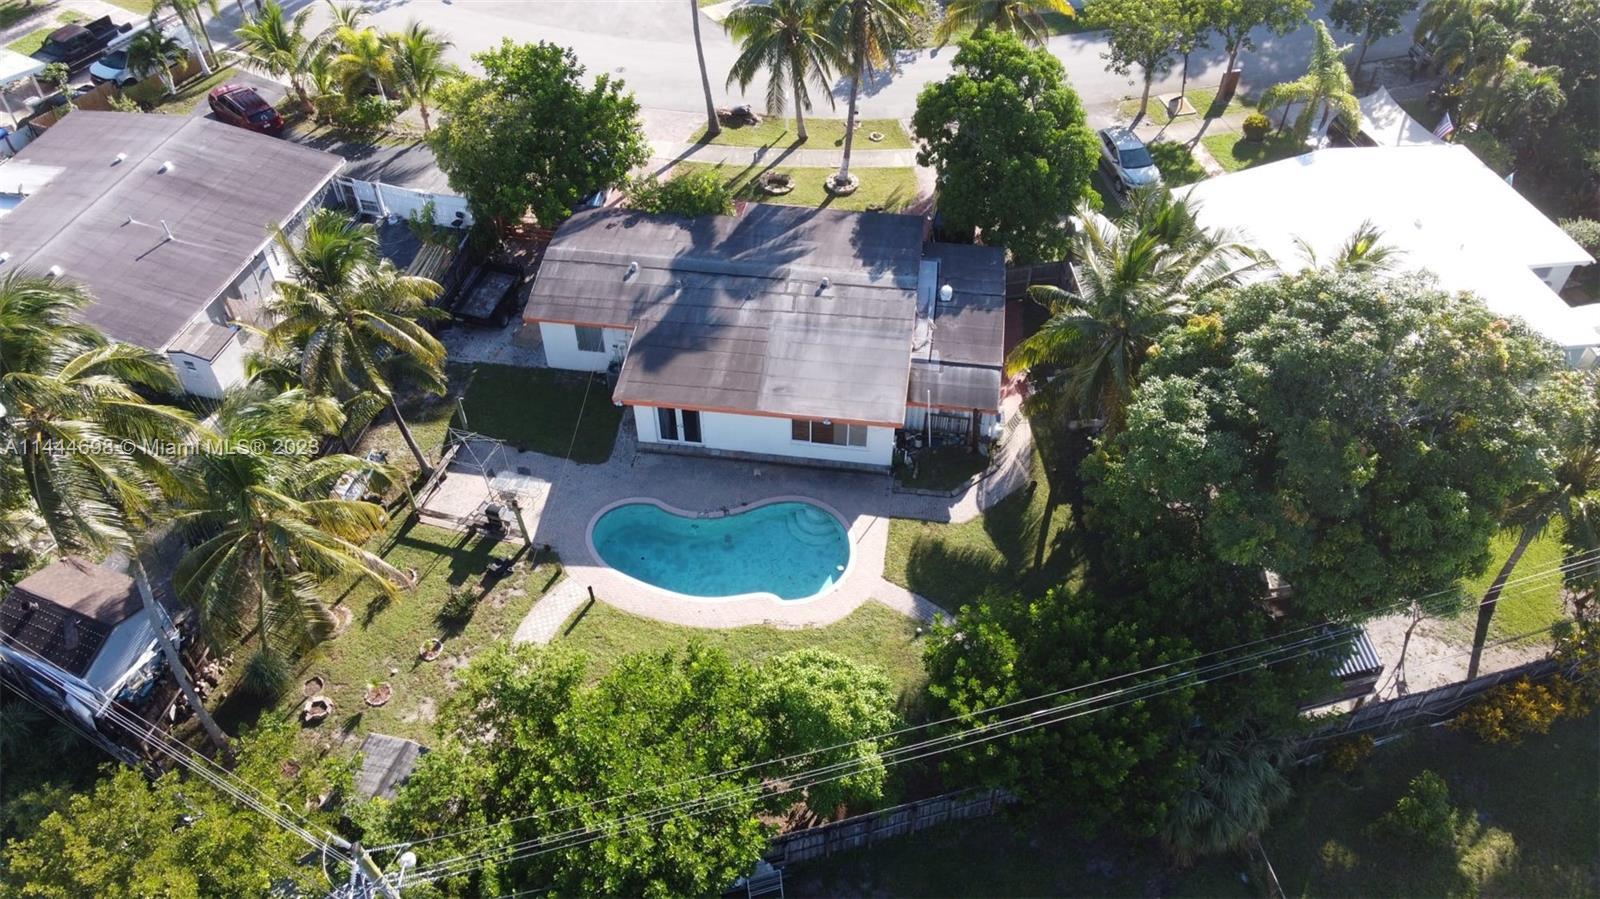 Great opportunity to own a property minutes from Pompano Beach. This 4 bedroom, 2 bathroom home has 